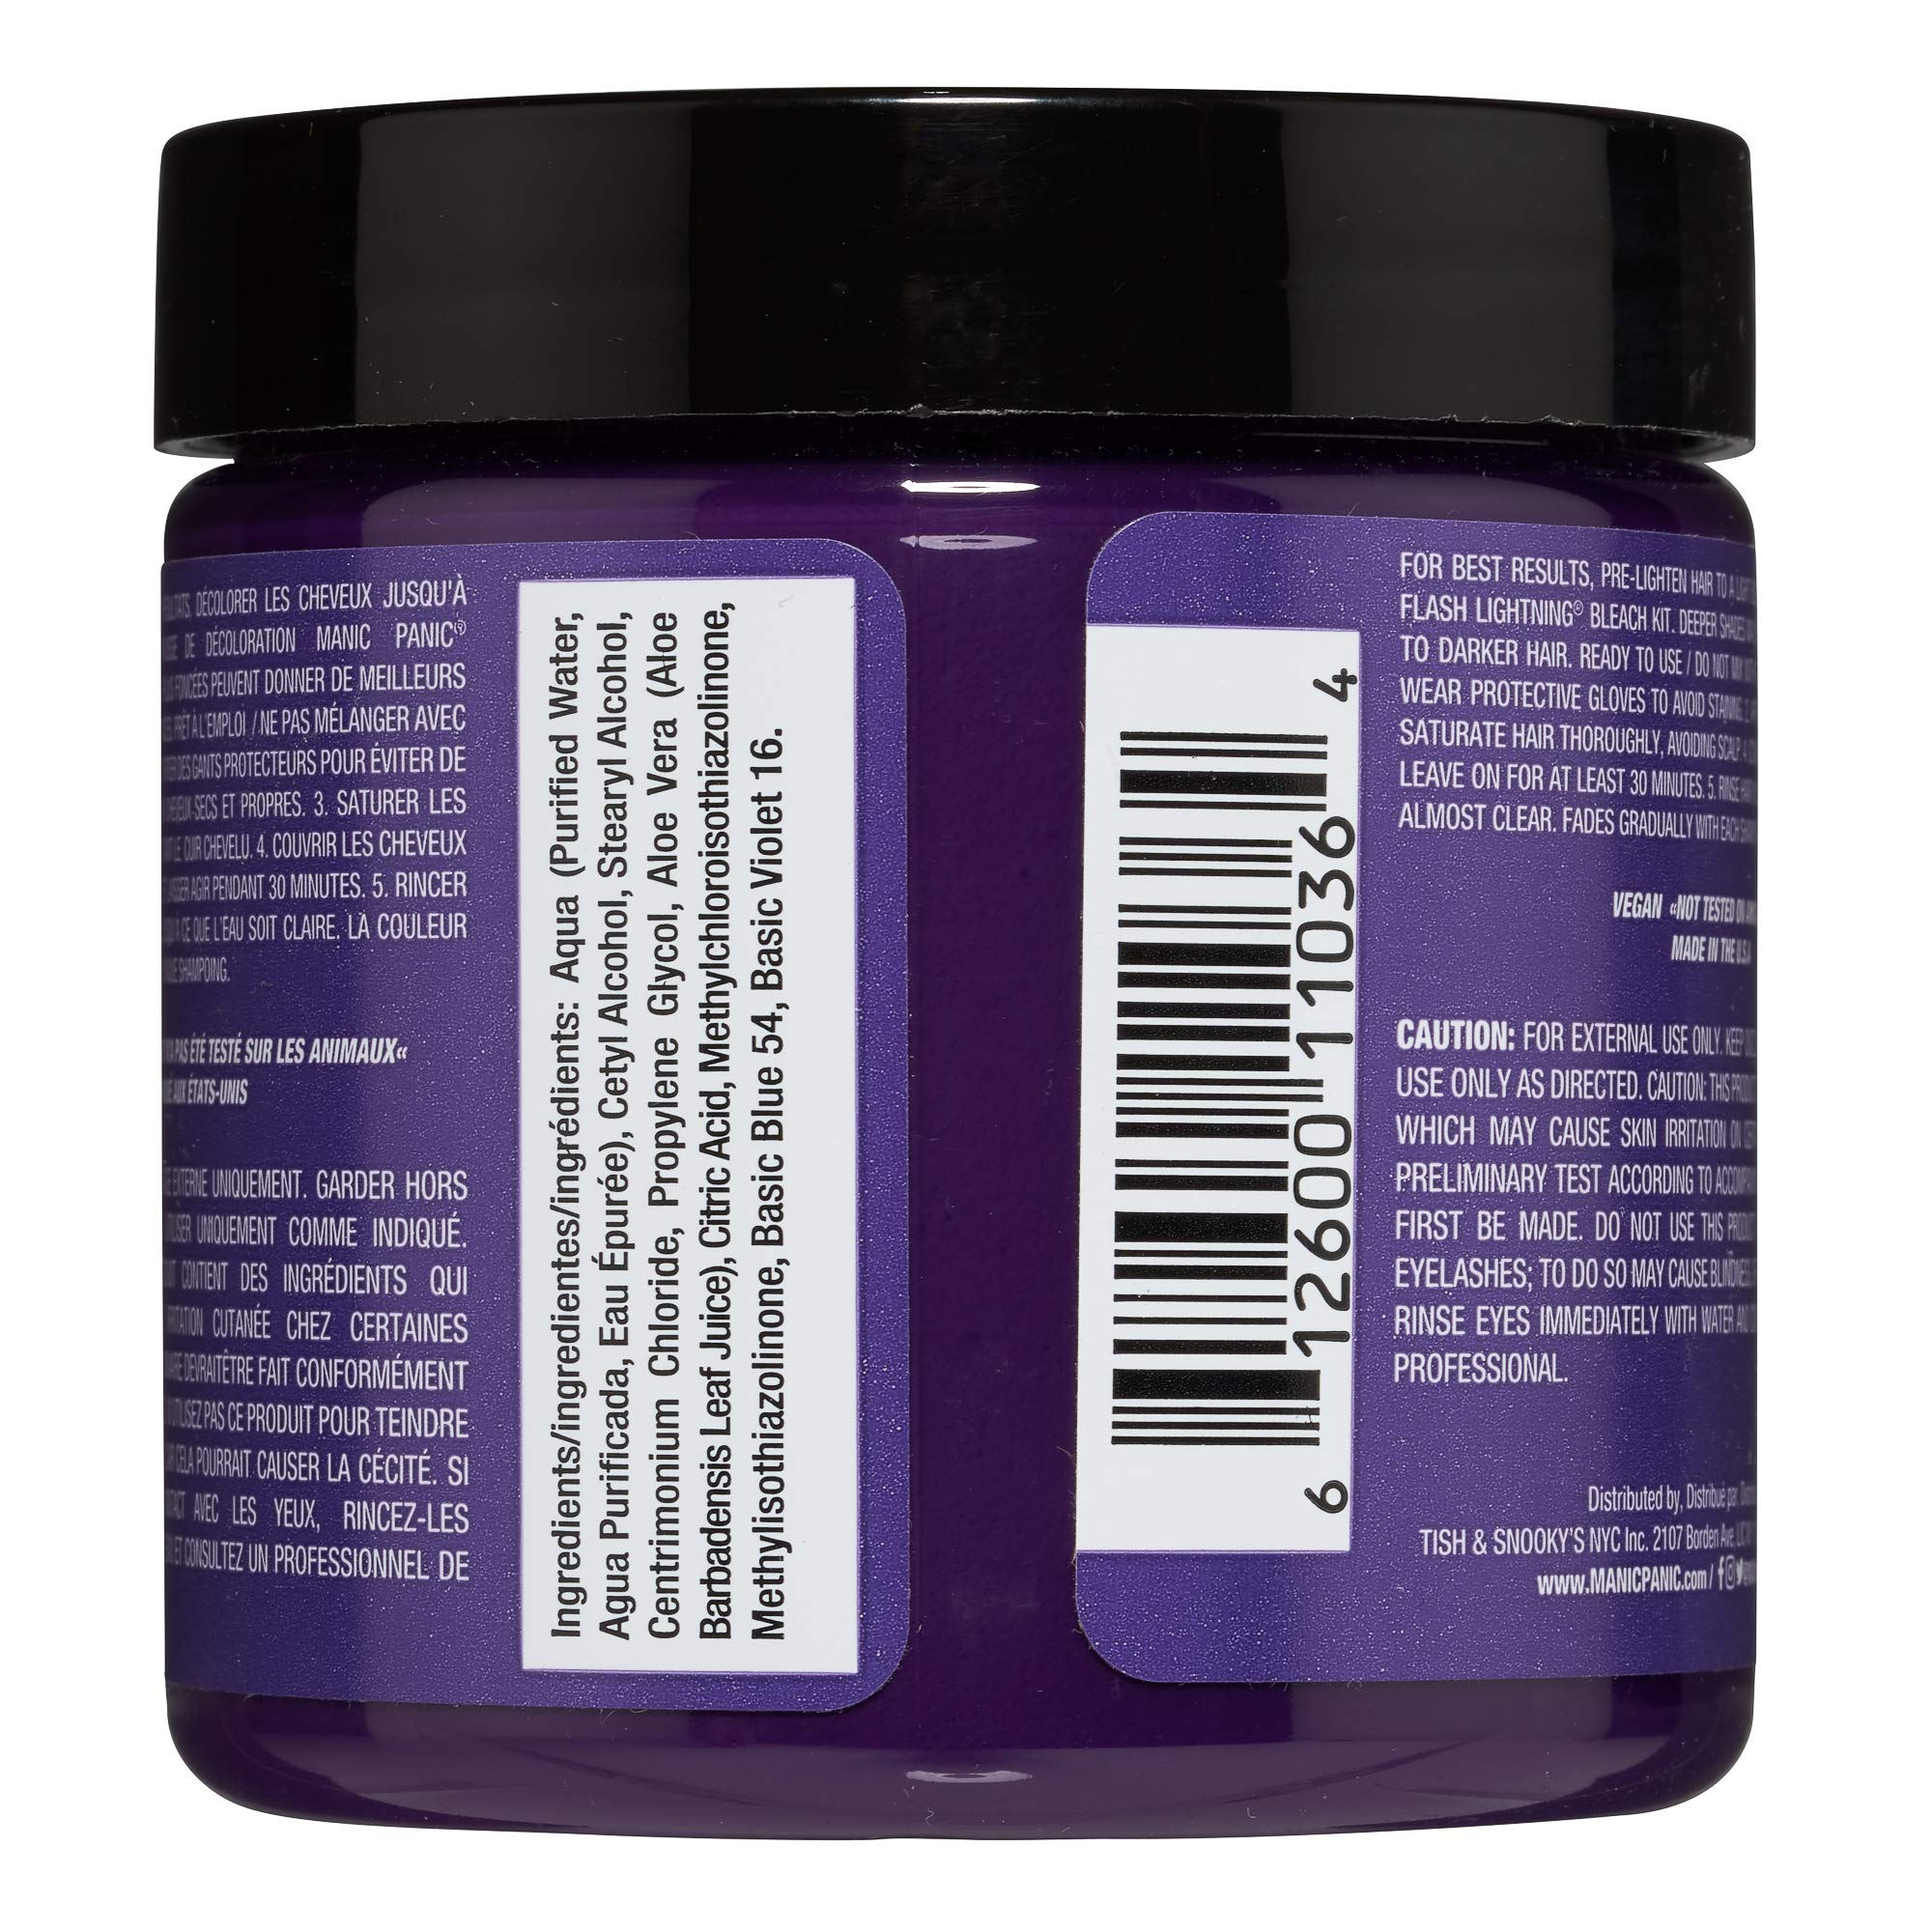 MANIC PANIC Electric Amethyst Hair Dye – Classic High Voltage - Semi-Permanent Hair Color - Medium Violet Purple With Blue Undertones - Vegan, PPD & Ammonia-Free - For Coloring Hair on Women & Men